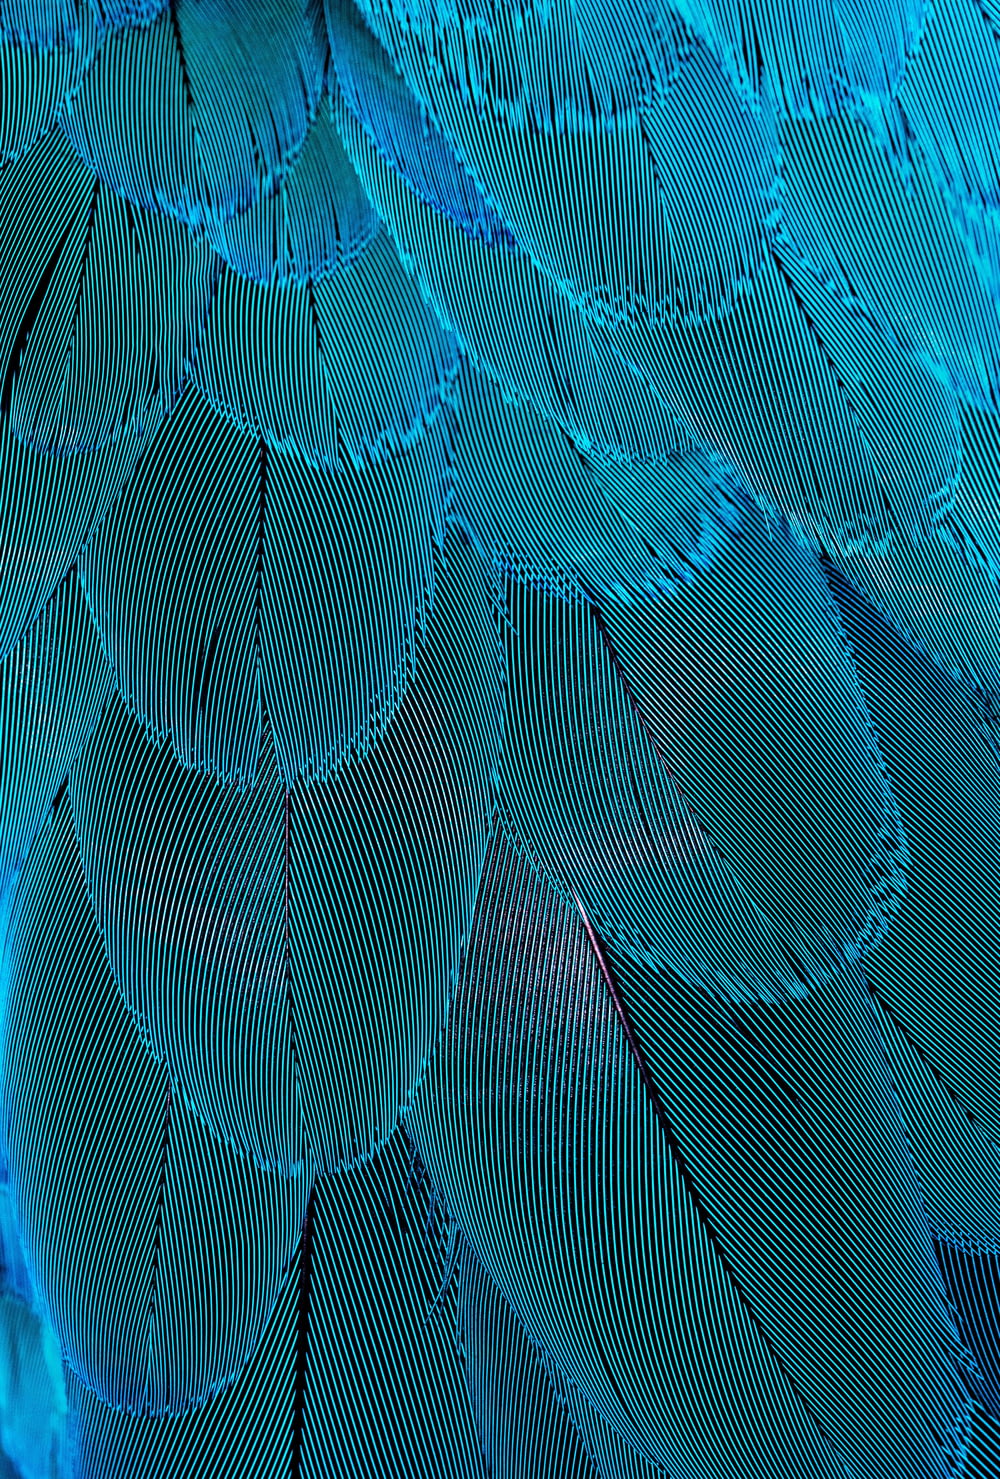 a close up of a blue bird's feathers